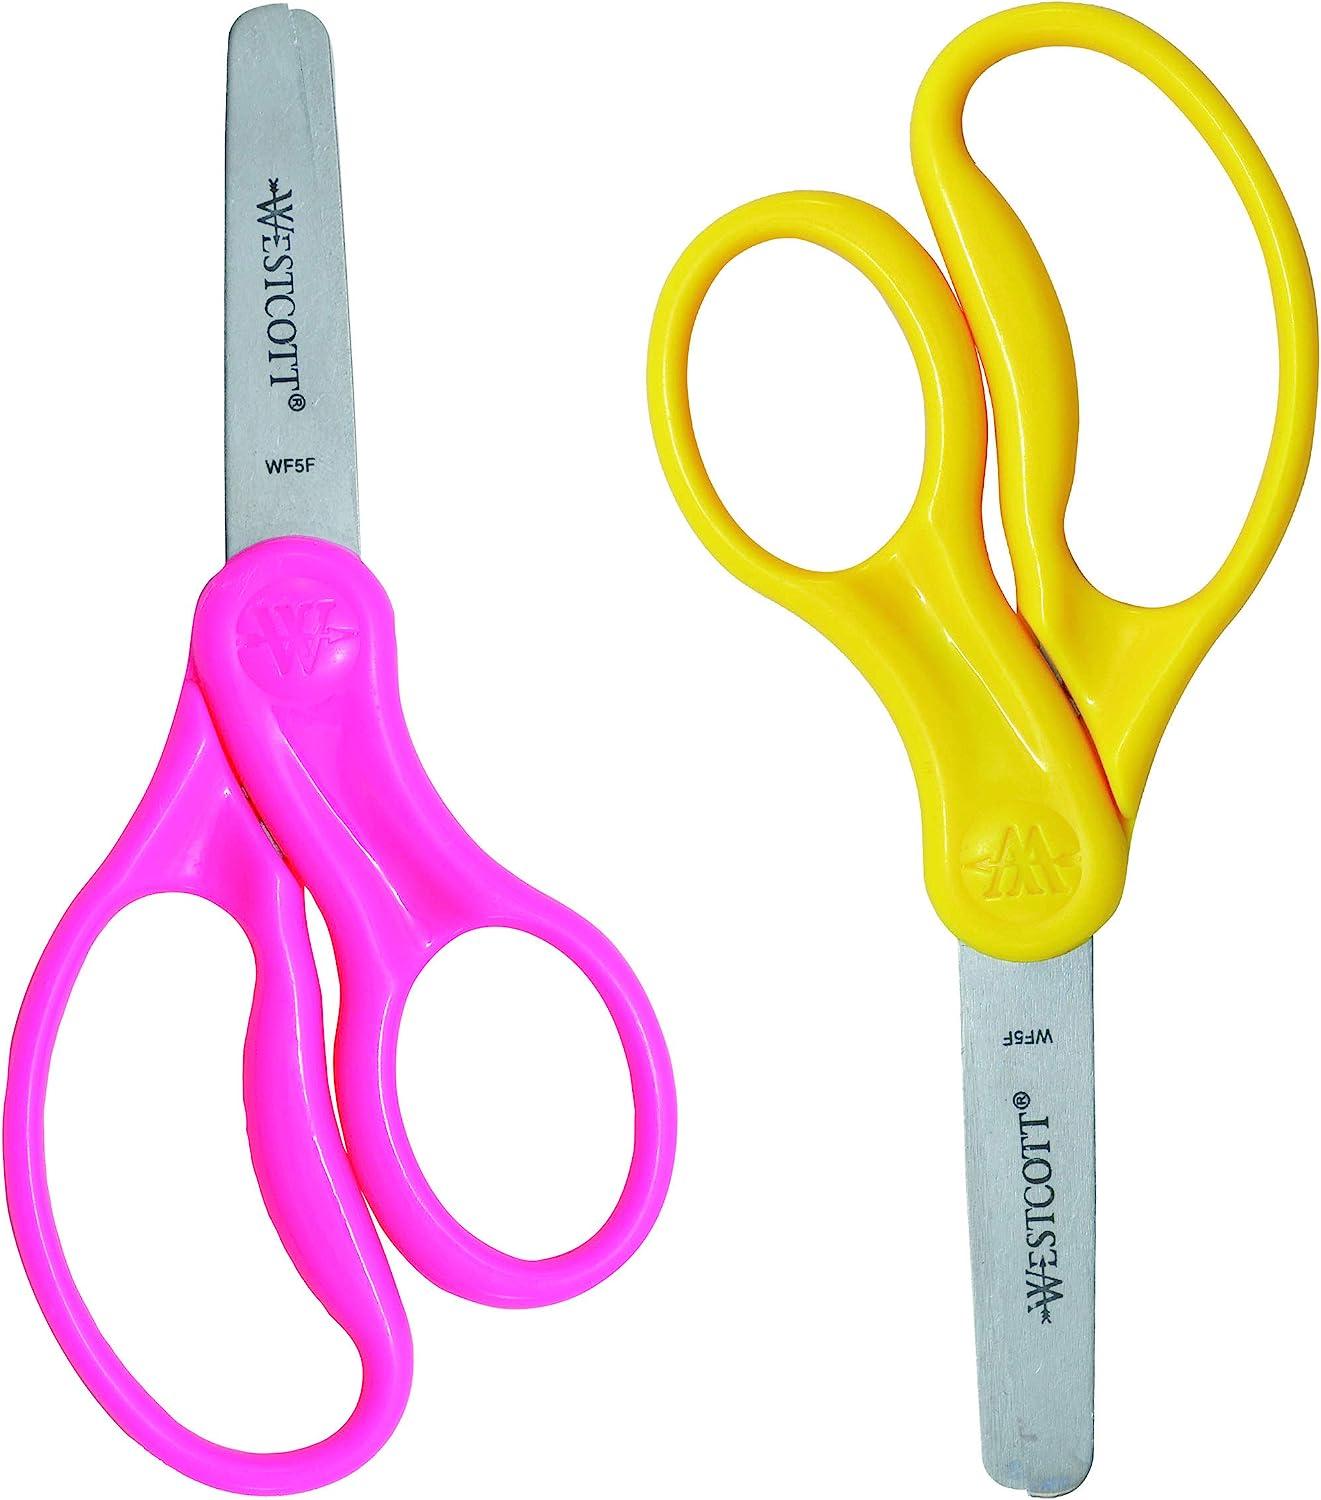 Westcott 16454 Right- and Left-Handed Scissors, Kids Scissors, Ages 4-8,  5-Inch Blunt Tip, Assorted, 6 Pack